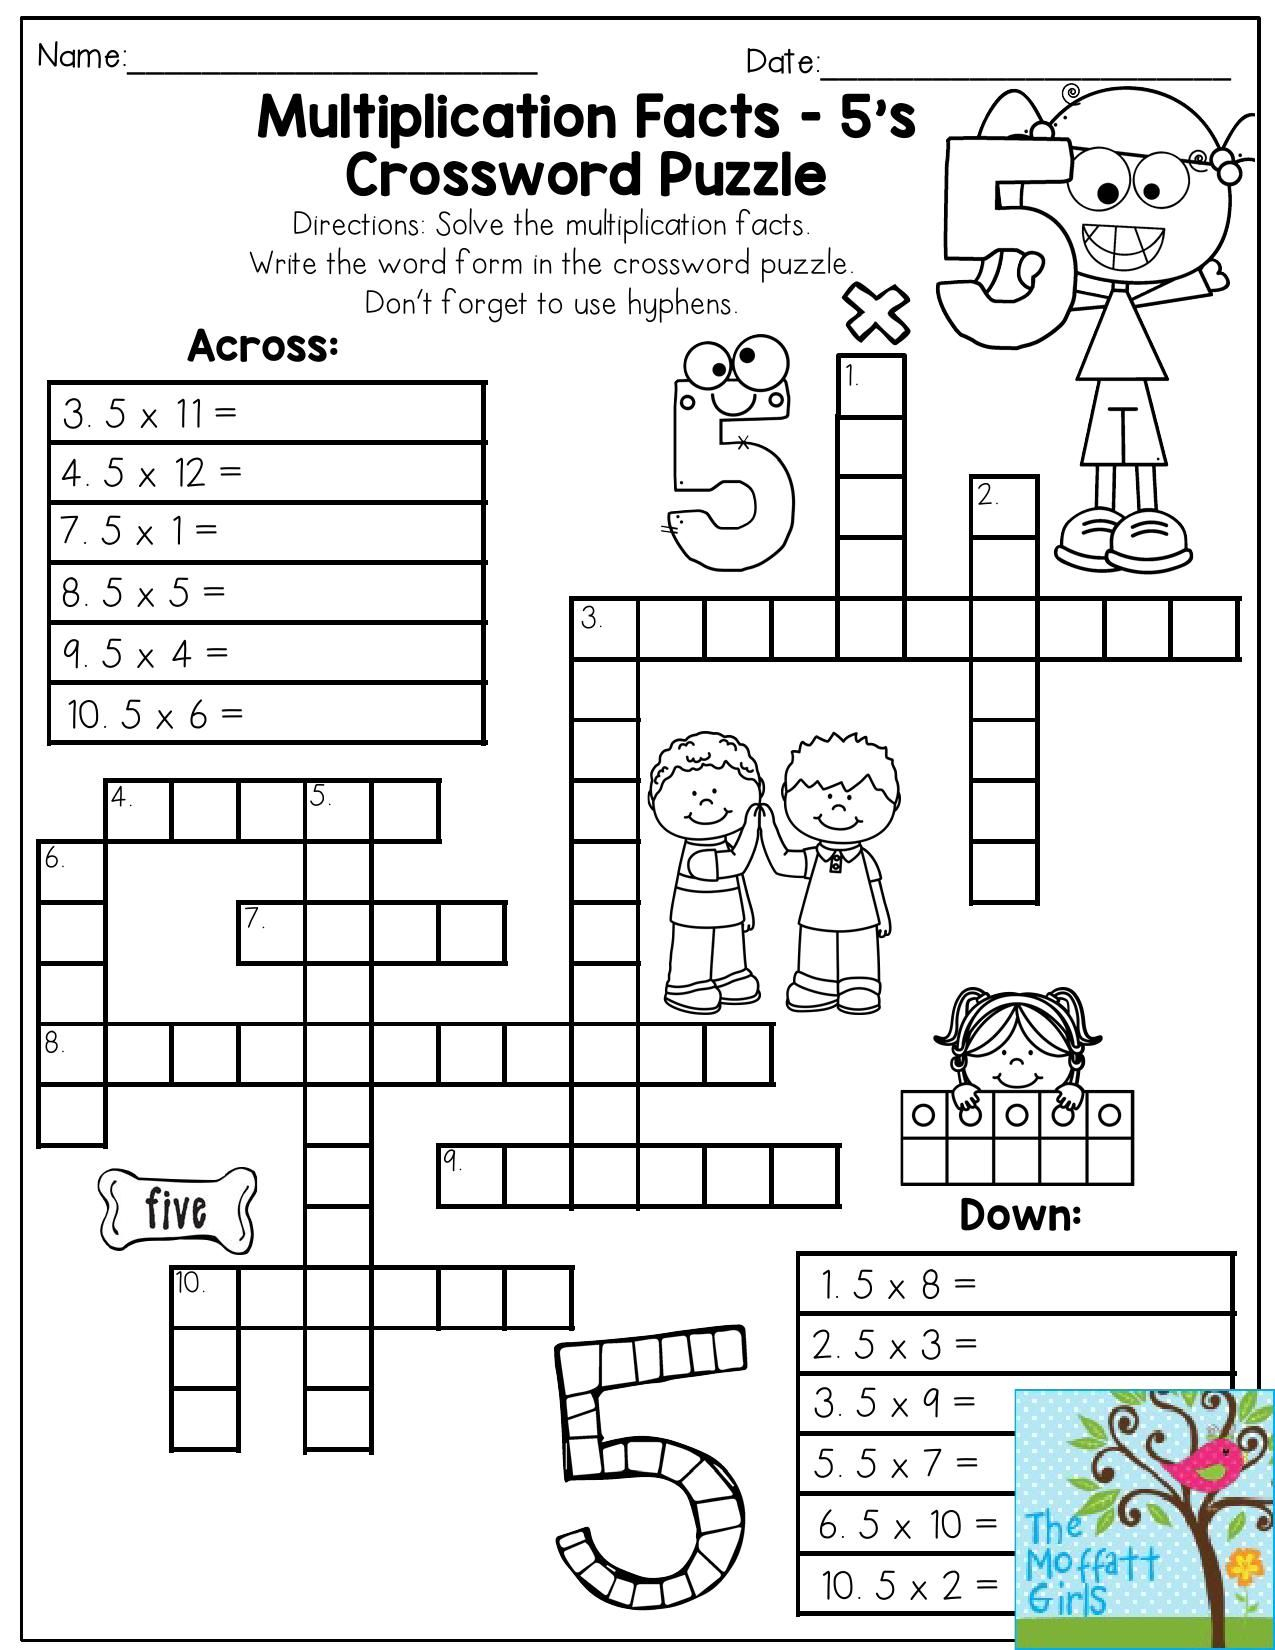 Multiplication Facts Crossword Puzzle- Third Grade Students Love - Grade 2 Crossword Puzzles Printable